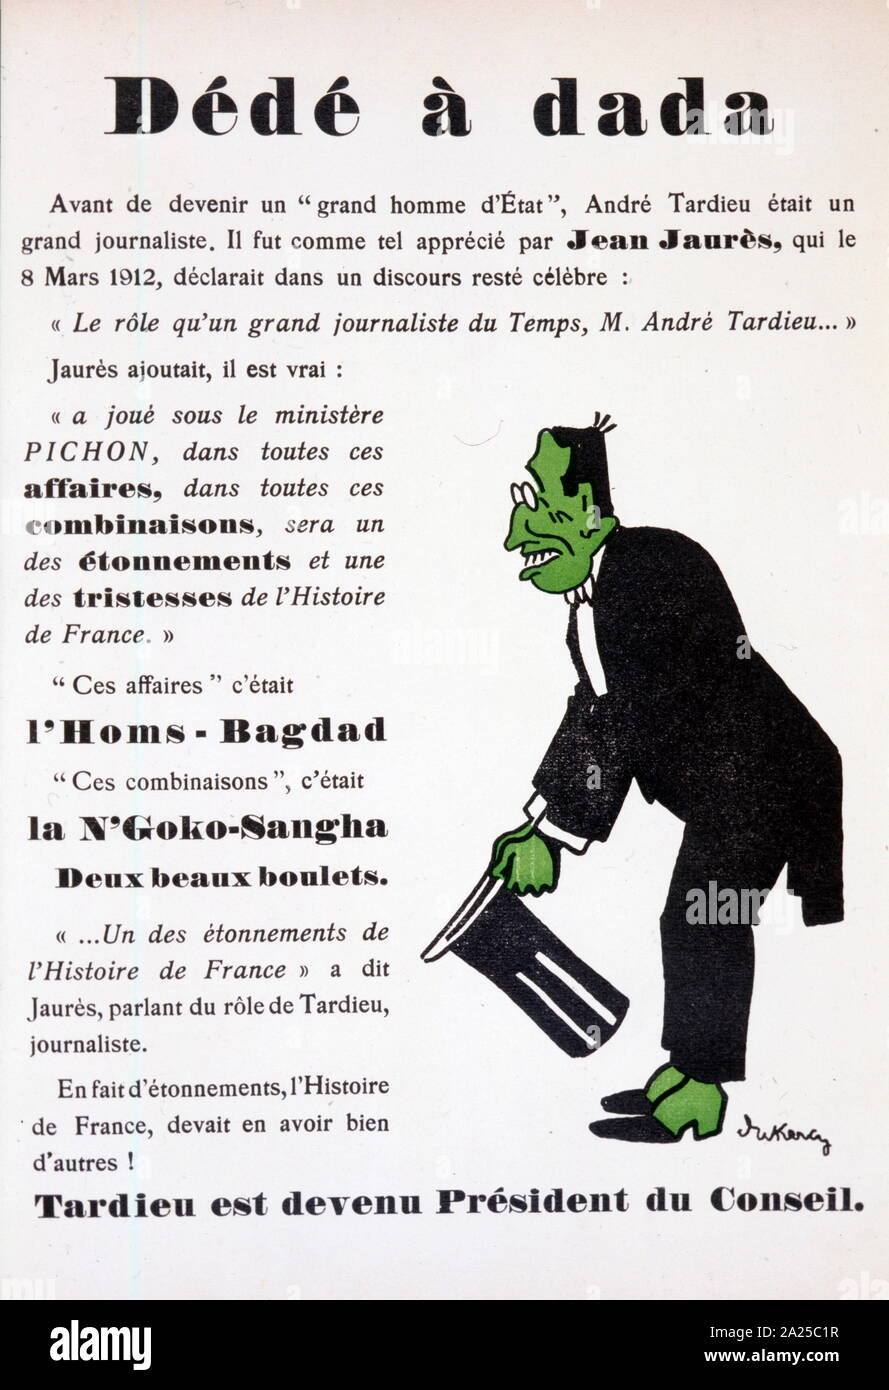 Dada dedication to Andre Tardieu (1876 – 1945), three times Prime Minister of France and a dominant figure of French political life in 1929–1932. 'Dedicated to dada' Dada (Dadaism) was an art movement of the European avant-garde in the early 20th century. circa 1929 Stock Photo